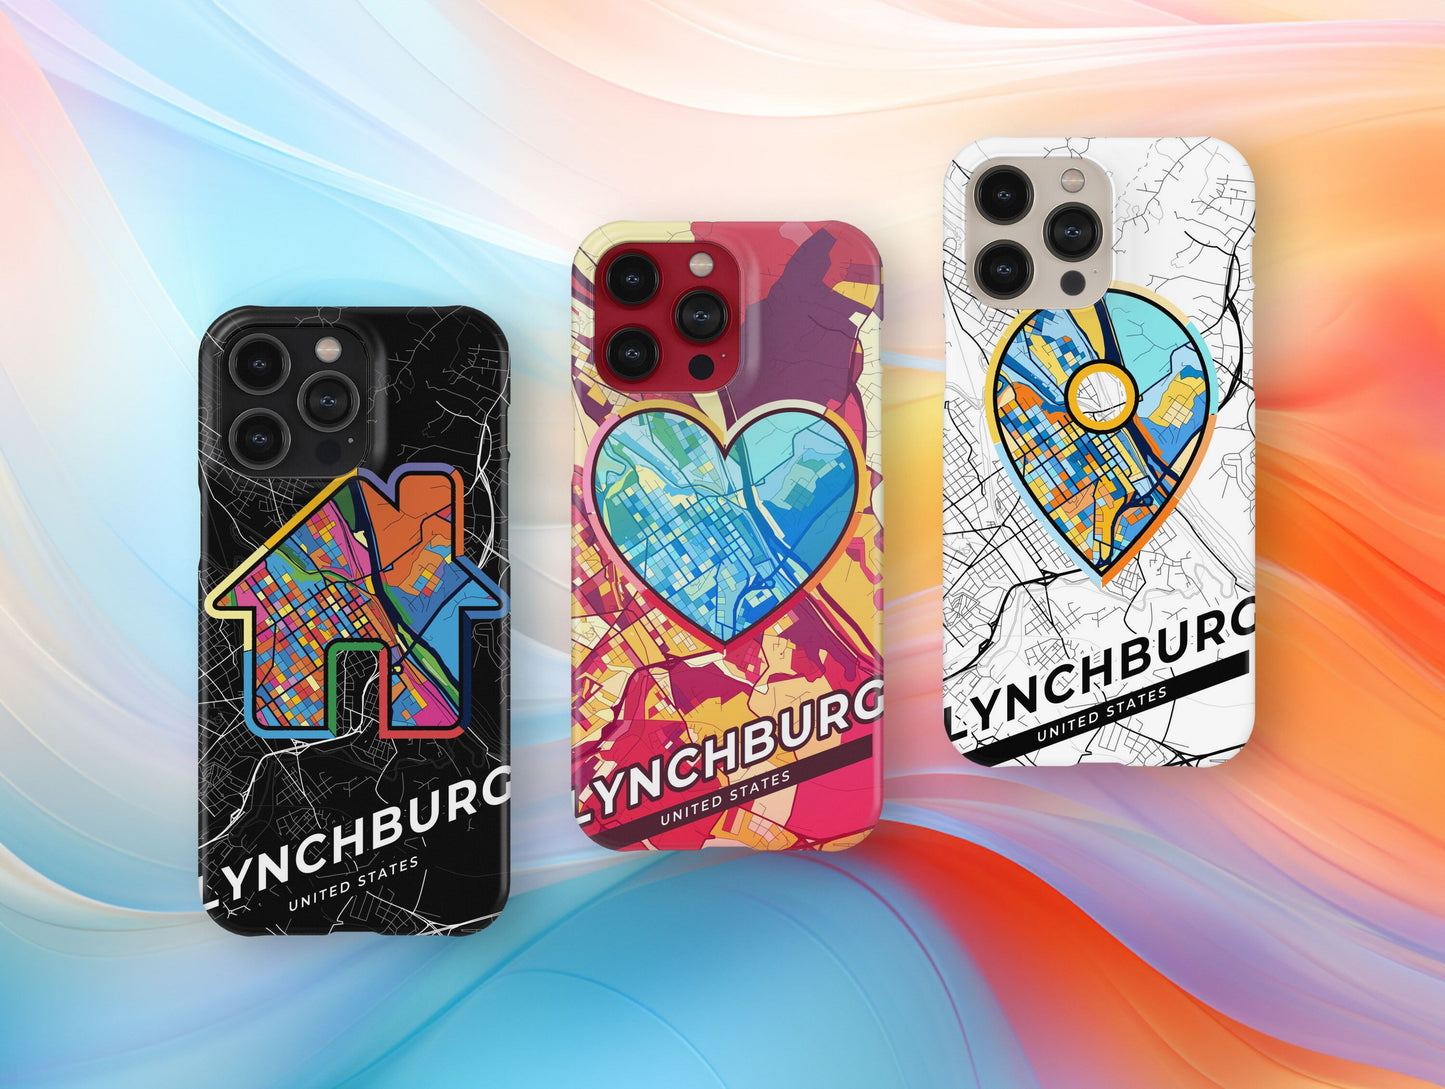 Lynchburg Virginia slim phone case with colorful icon. Birthday, wedding or housewarming gift. Couple match cases.